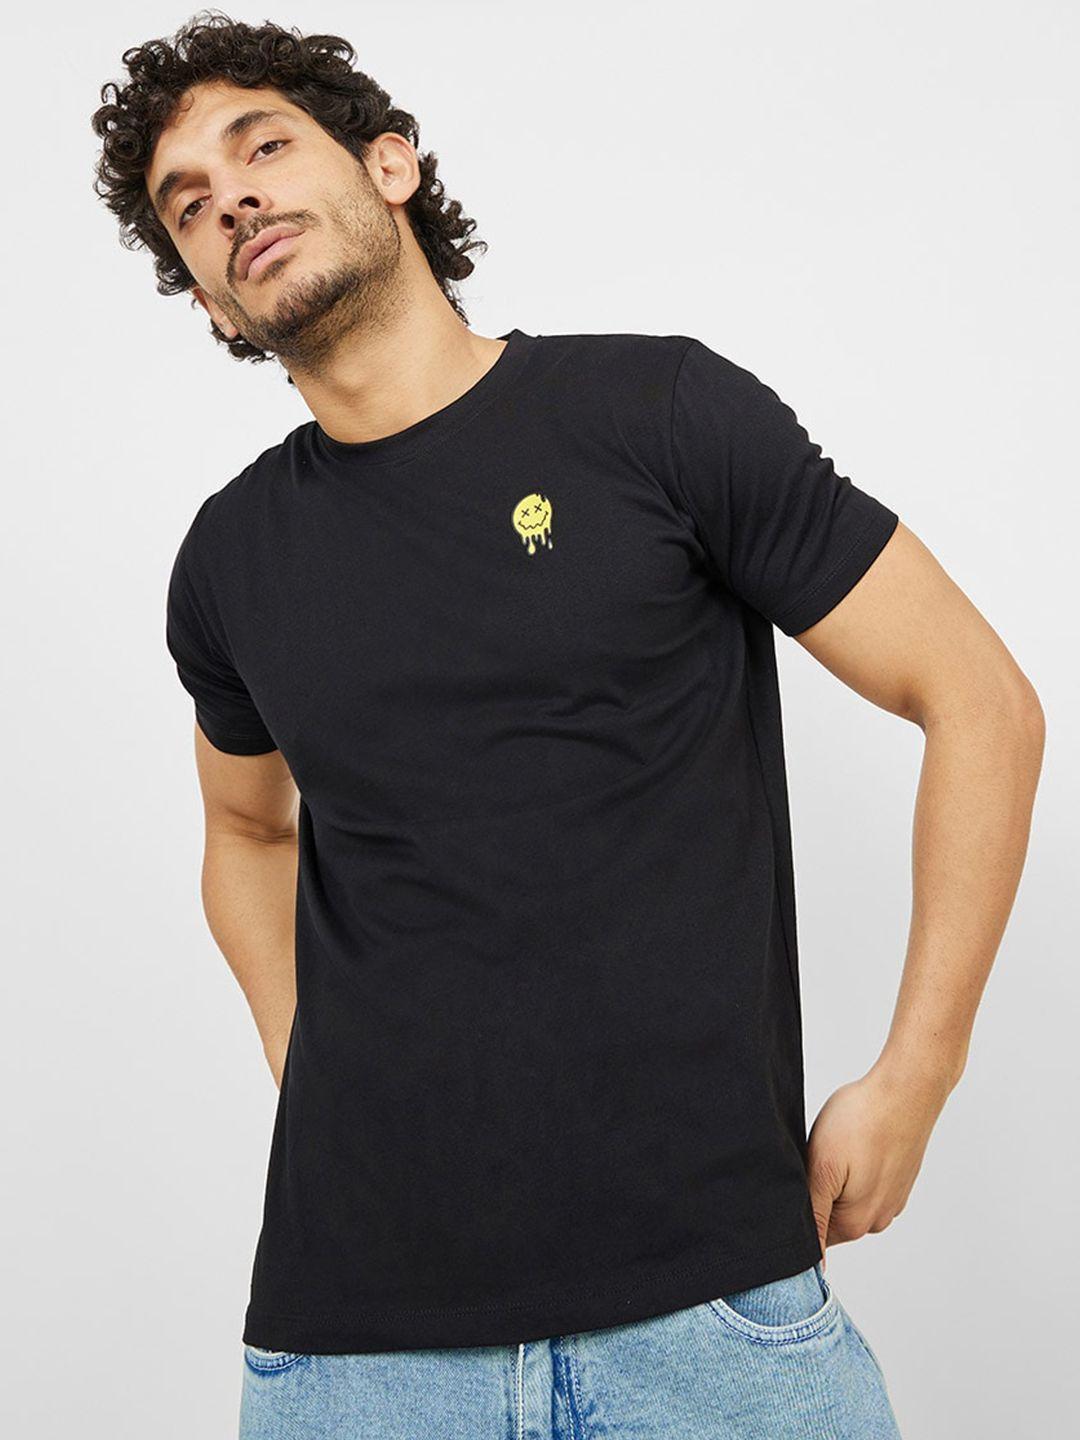 styli round neck short sleeves pure cotton t-shirt